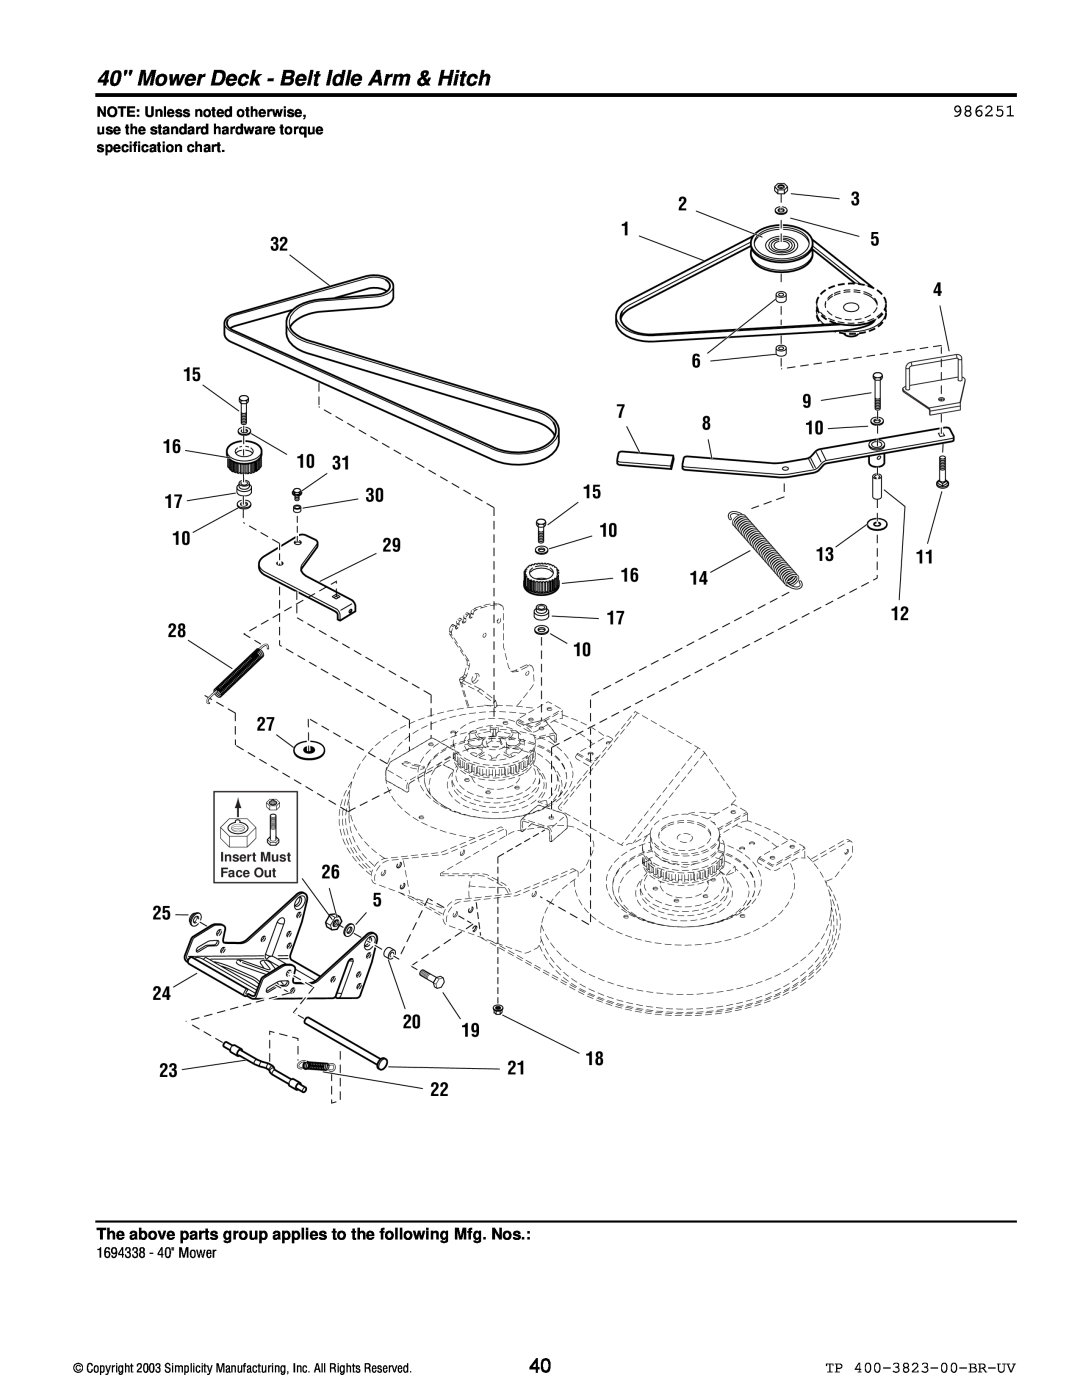 Simplicity 2003 Rapid Mower Deck - Belt Idle Arm & Hitch, 986251, The above parts group applies to the following Mfg. Nos 